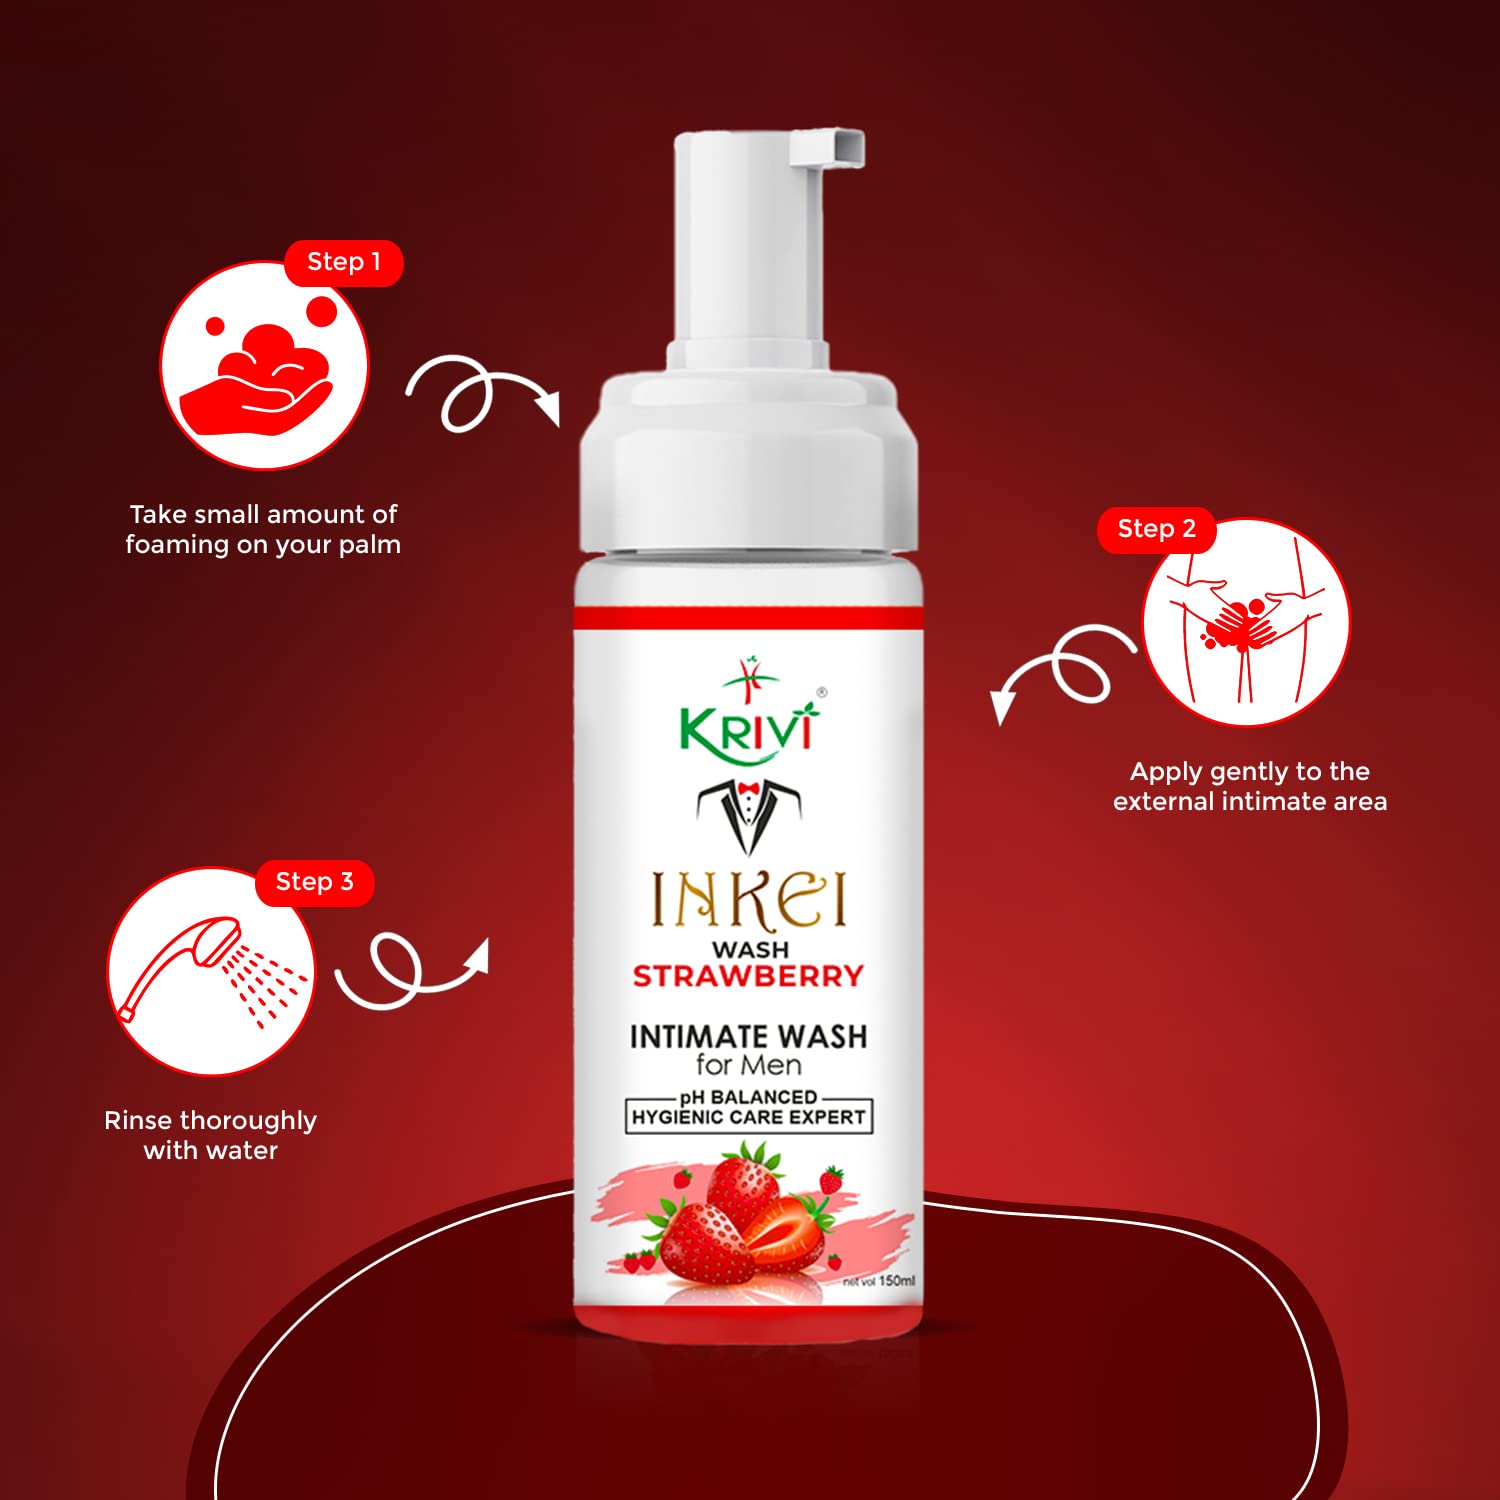 Krivi Inkei Foaming Intimate Wash Strawberry for Man The hygiene care expert with sweetness of Strawberry with Tree Tea Oil, Sea Buckthorn Oil, and goodness of Shilajit & Ashwagandha. 150 ml (Pack of 1)